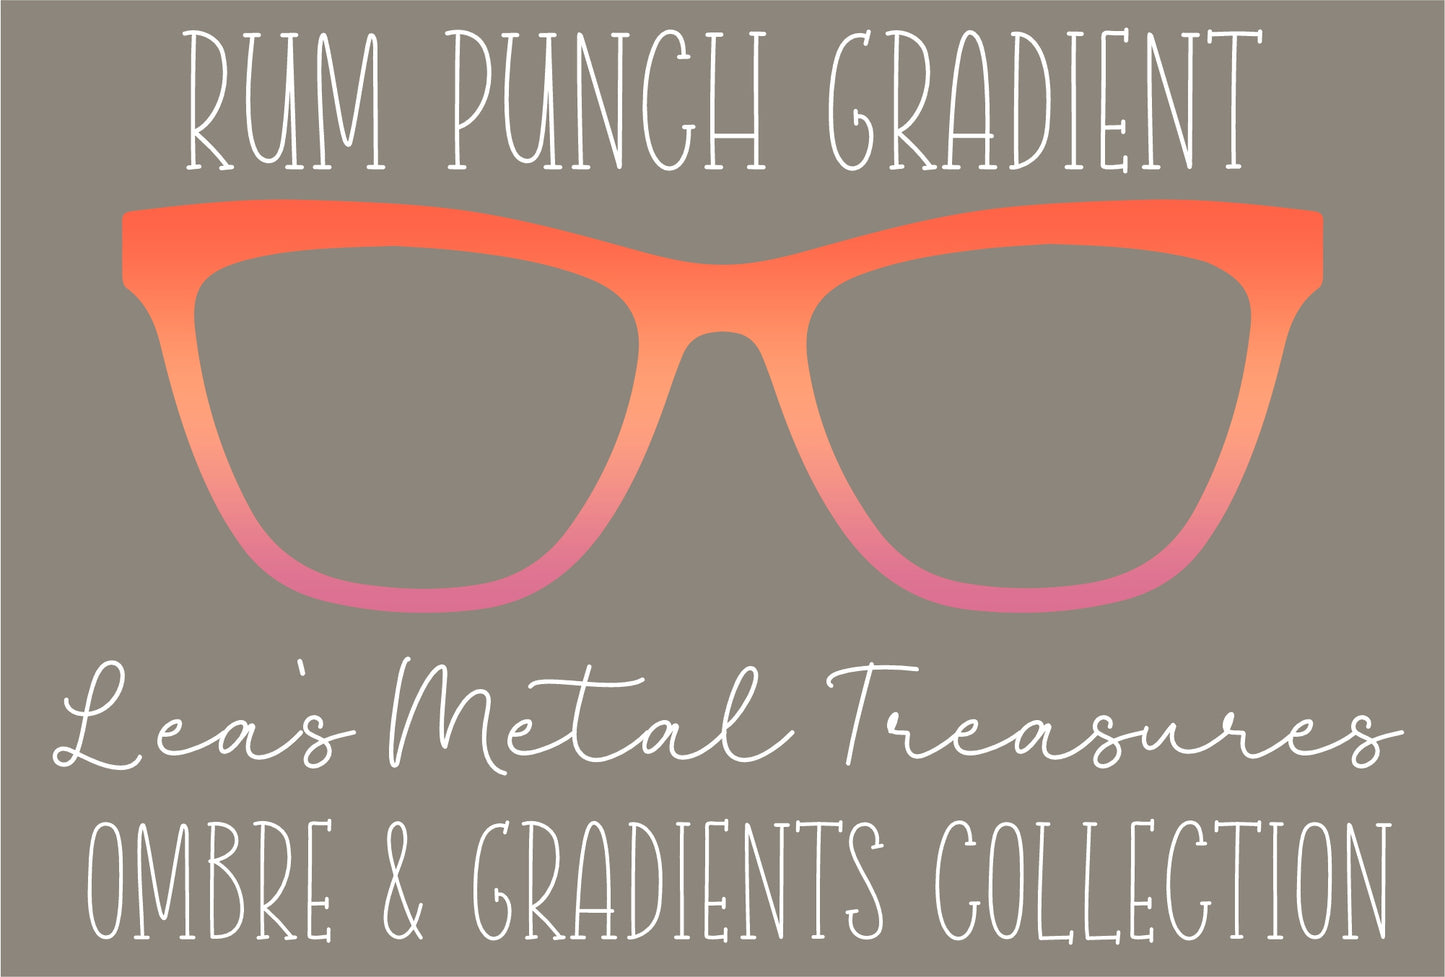 Rum punch Gradient Eyewear TOPPER COMES WITH MAGNETS